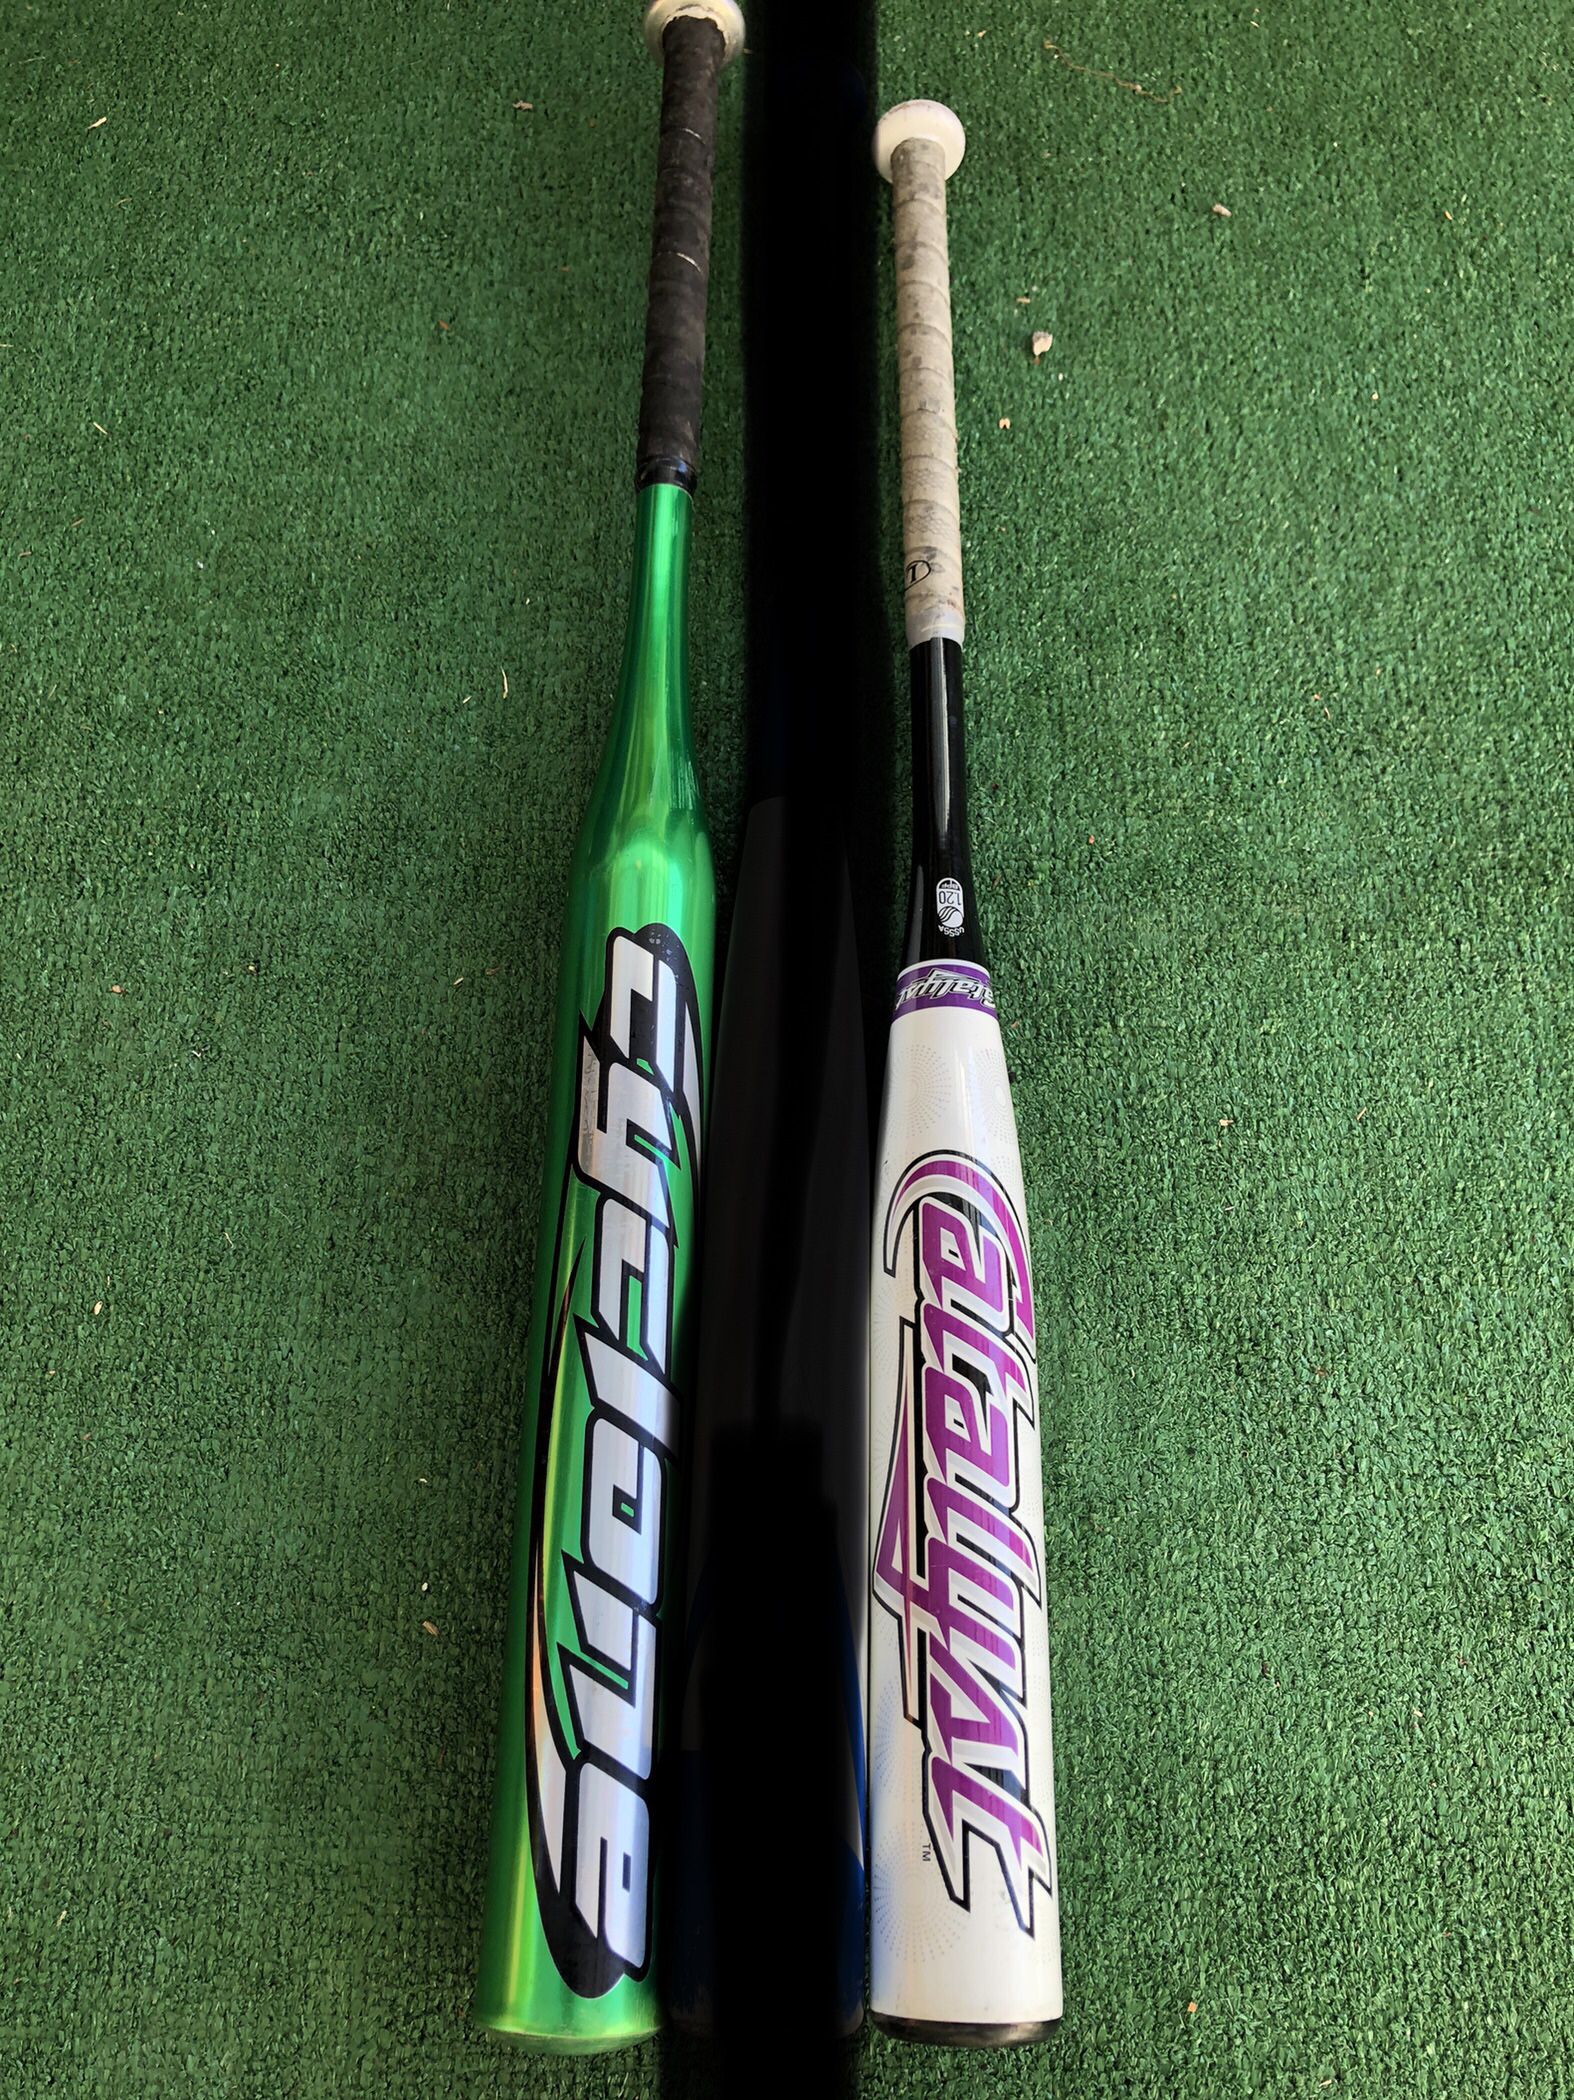 Softball Bats In Solid Condition Sz 30in 32in Have Equipment Gloves Bats